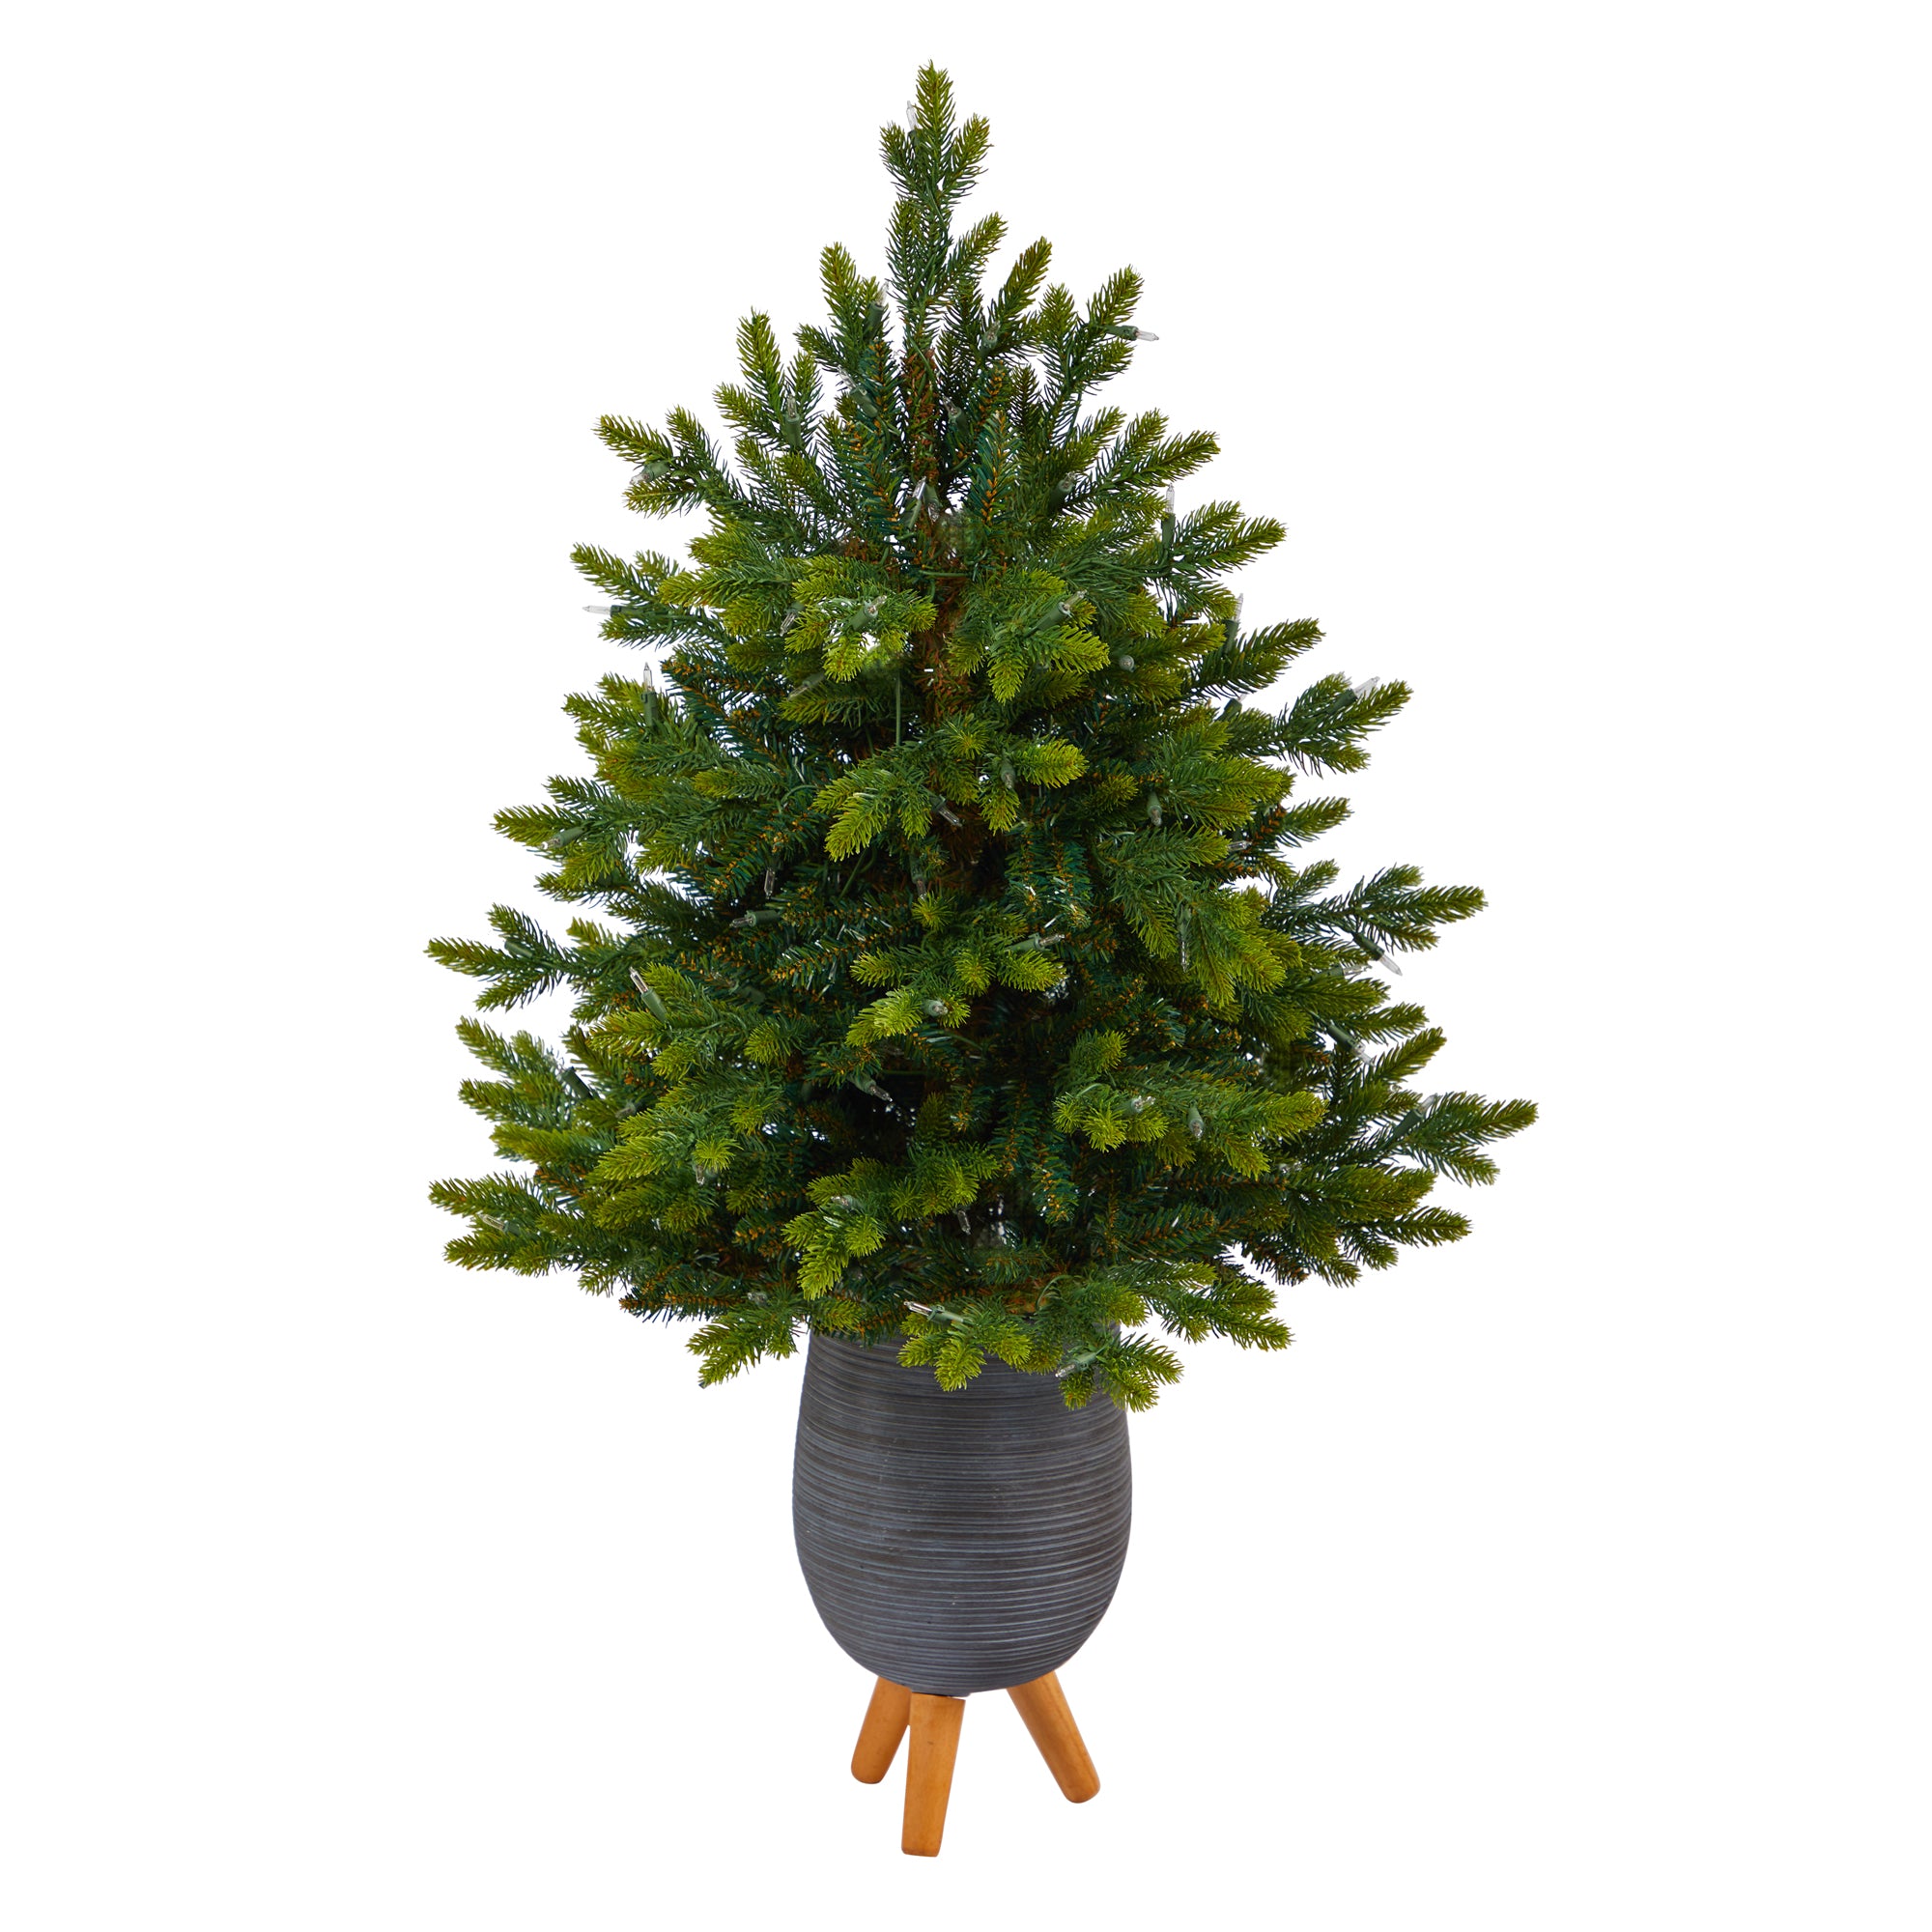 3.5' North Carolina Fir Artificial Christmas Tree with 150 Clear Lights and 563 Bendable Branches in Gray Planter with Stand